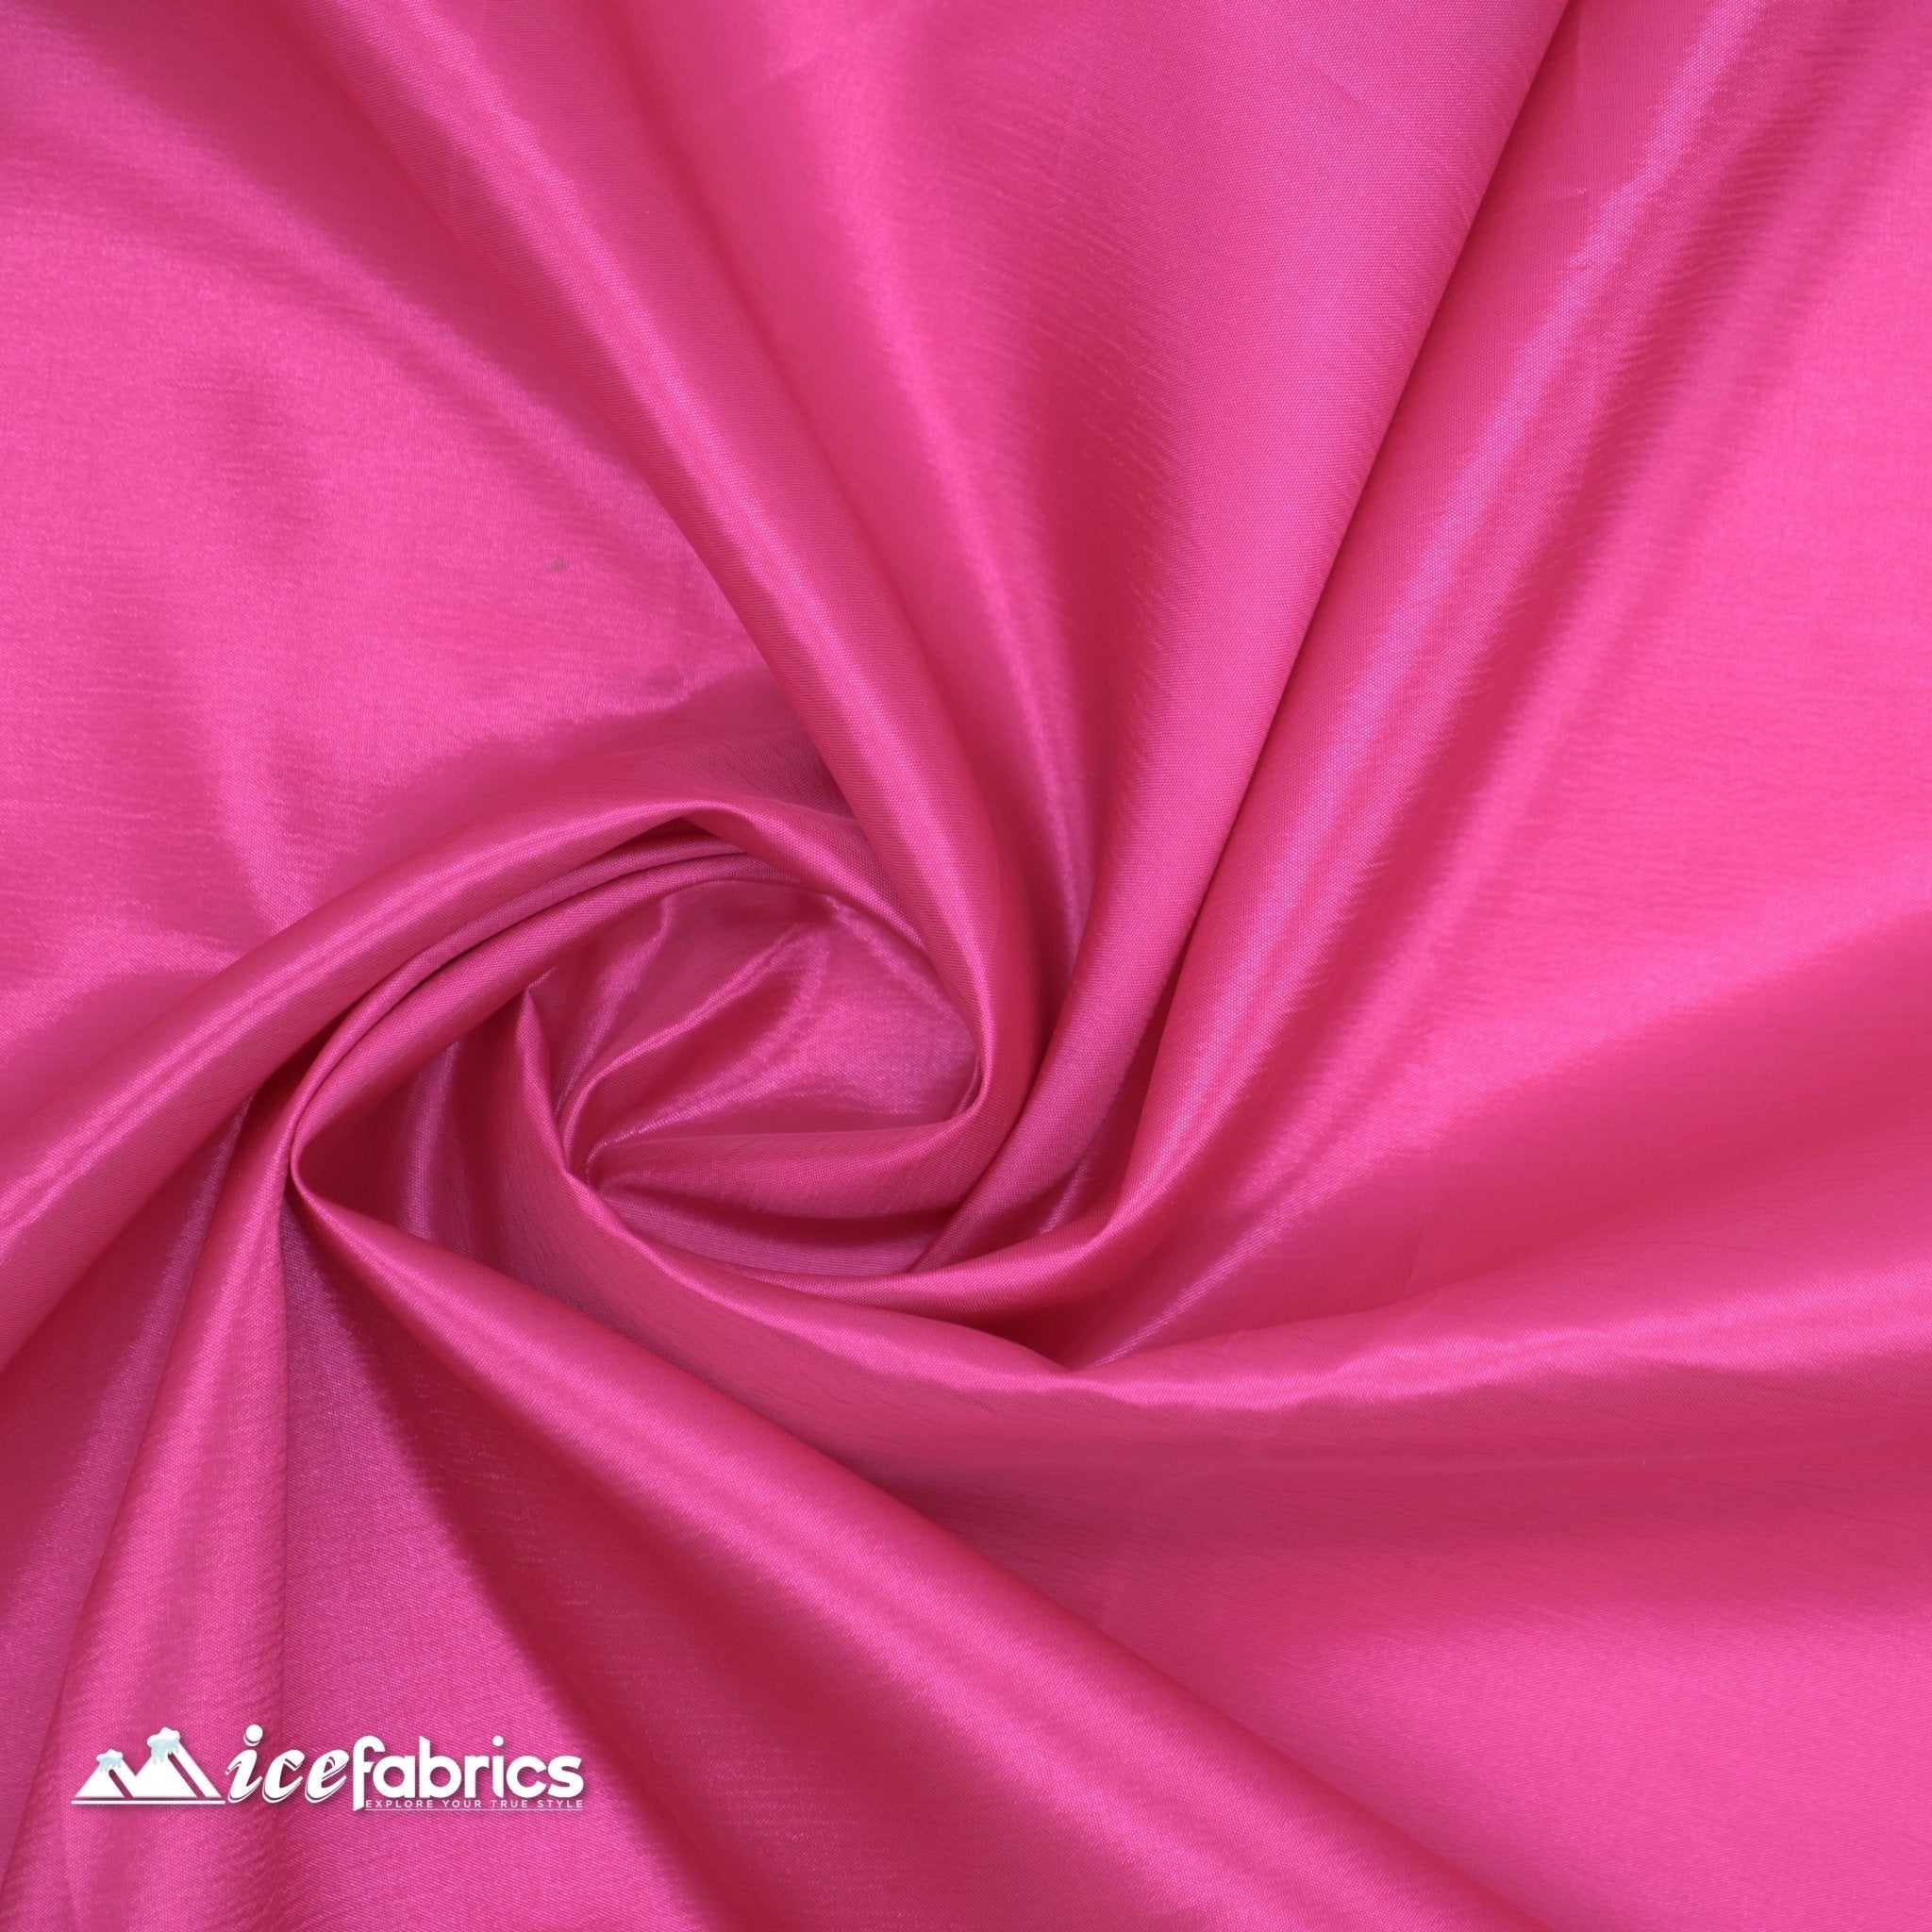 High Quality Solid Taffeta Fabric_ 60" Width_ By The YardTaffeta FabricICEFABRICICE FABRICSHot PinkHigh Quality Solid Taffeta Fabric_ 60" Width_ By The YardTaffeta FabricICEFABRICICE FABRICSHot PinkHigh Quality Solid Taffeta Fabric_ 60" Width_ By The Yard ICEFABRIC Hot Pink